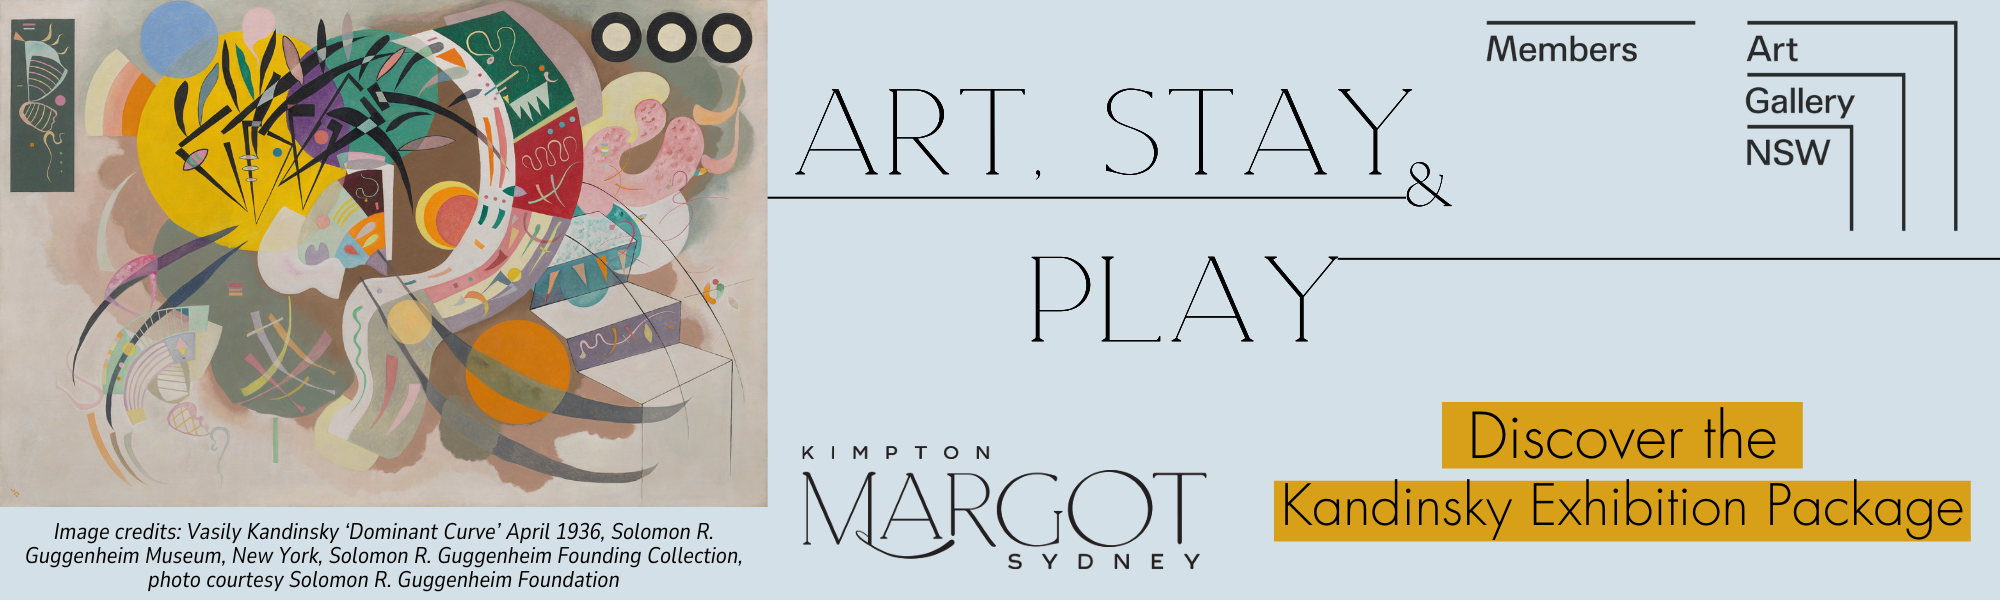 ART Stay and PLAY